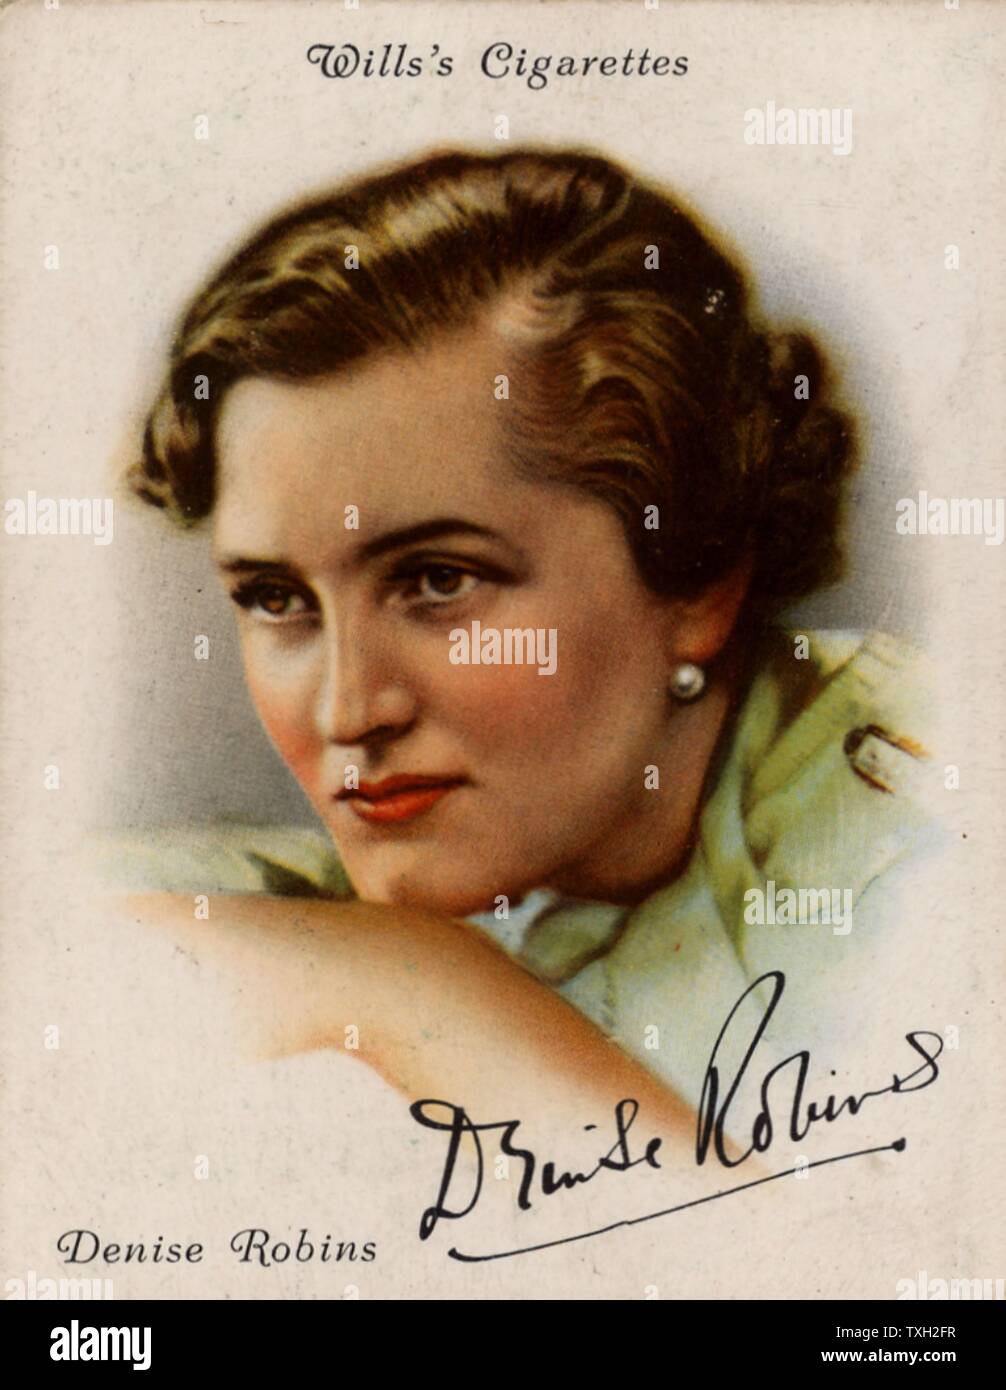 Denise Robins (1897-1985) British popular novelist, dramatist and short story writer.  From a series of cards of 'Famous British Authors' (London, 1937). Stock Photo